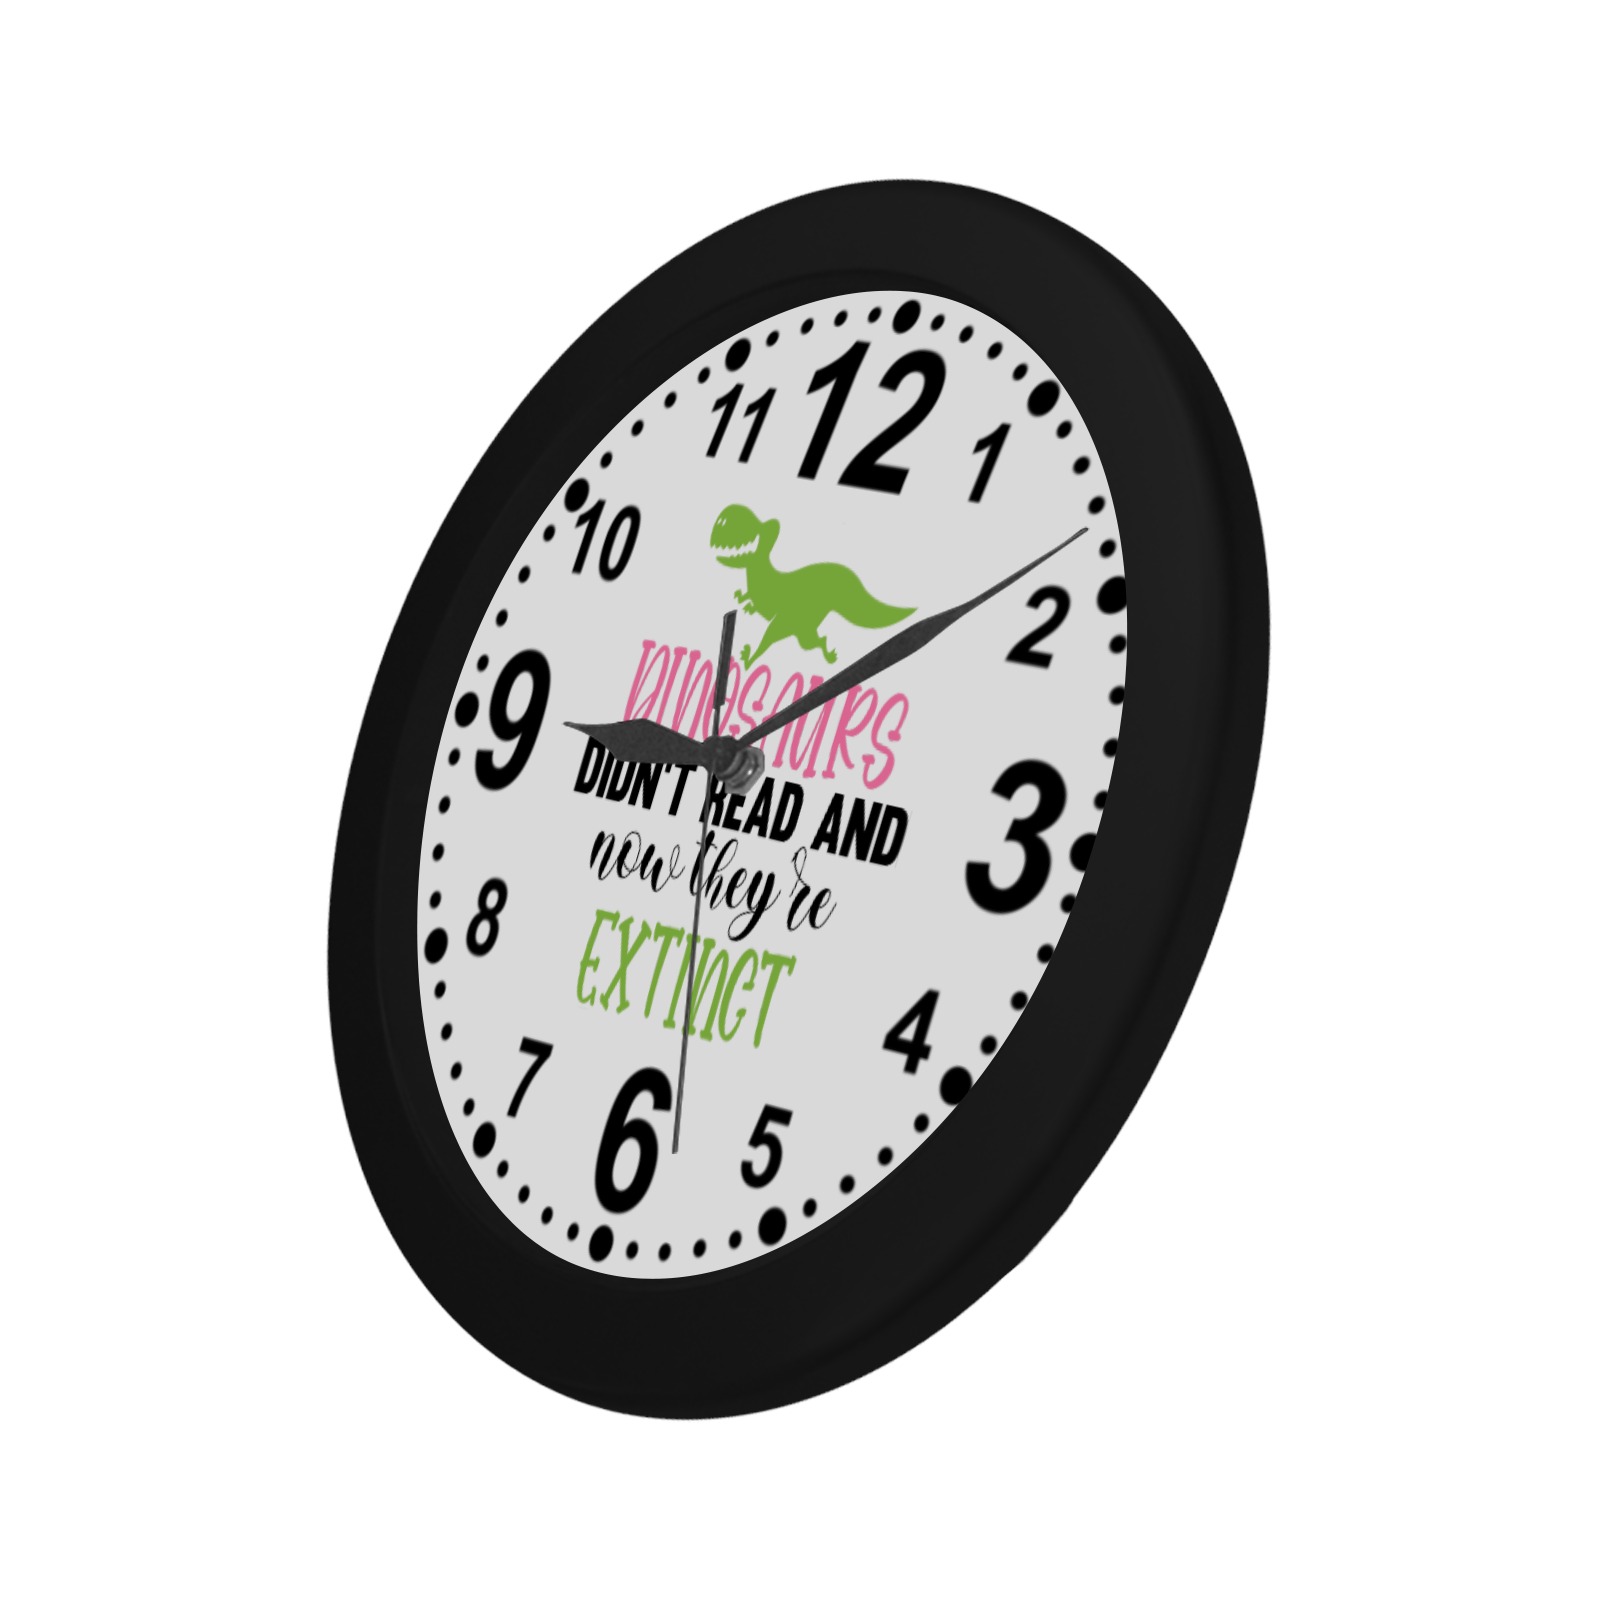 Dinosaurs Didn't Read and Now They're Extinct Circular Plastic Wall clock